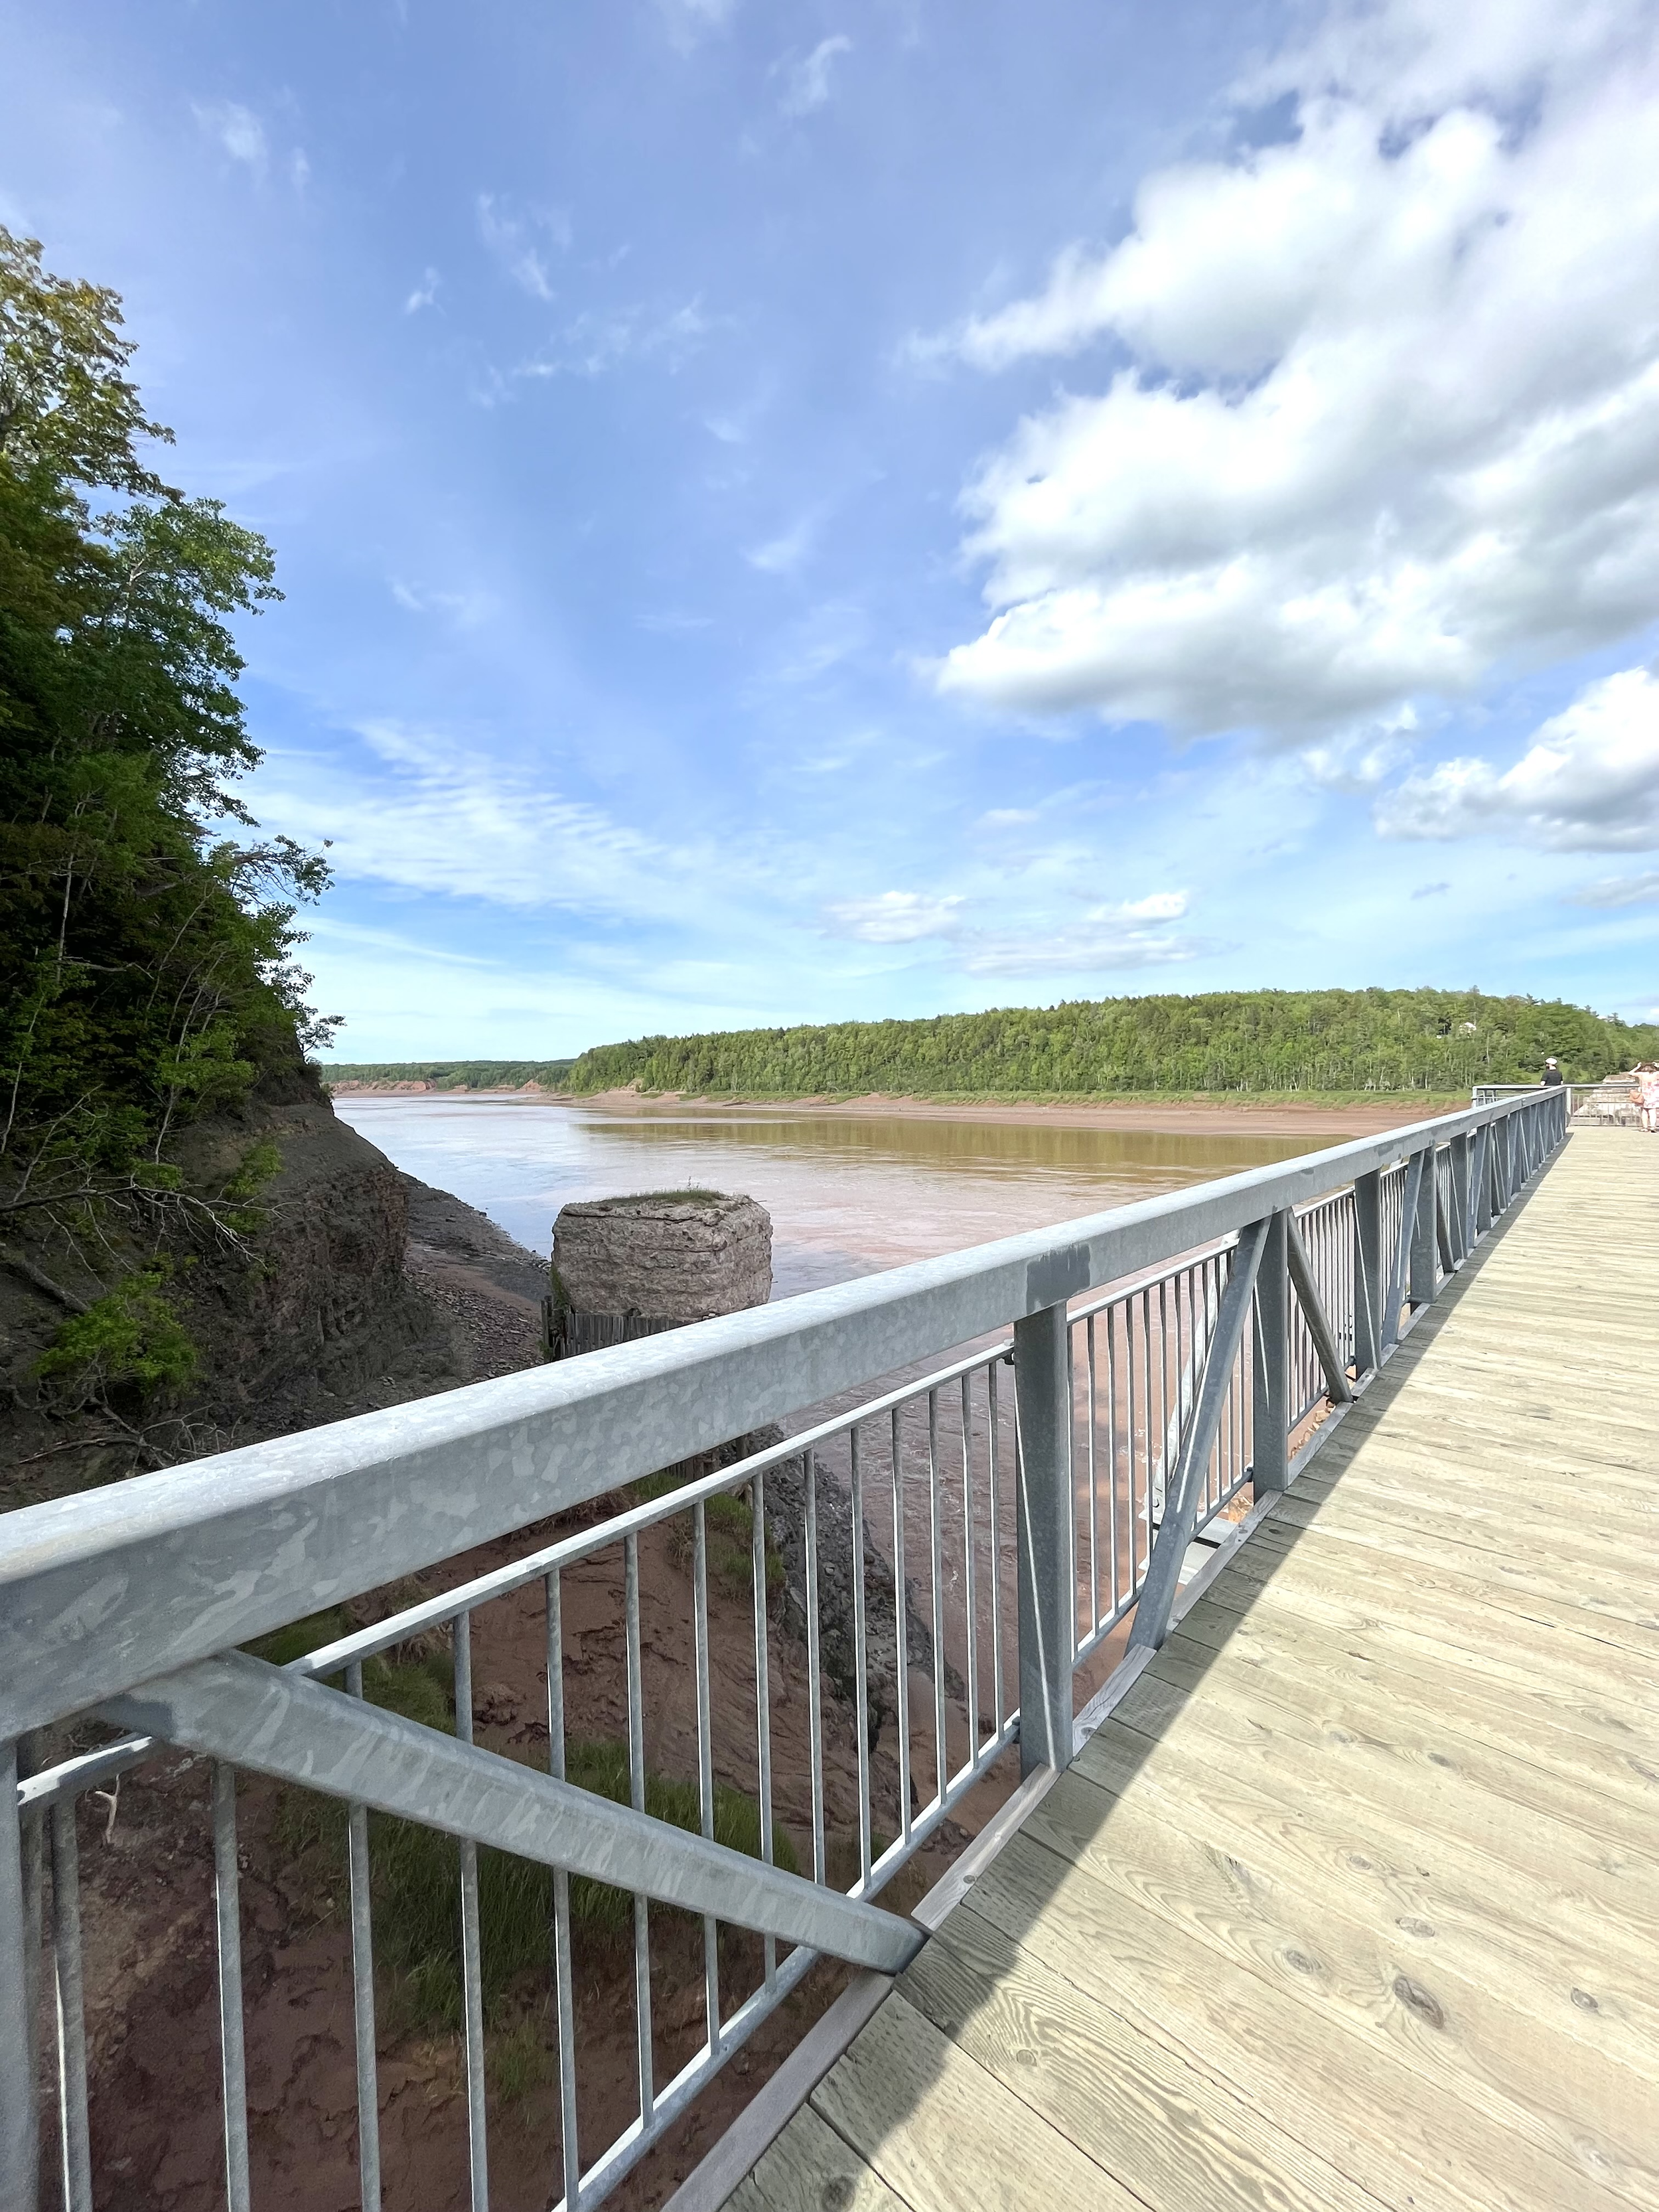 View of the Shubenacadie River from the Interpretive Centre observation platform.